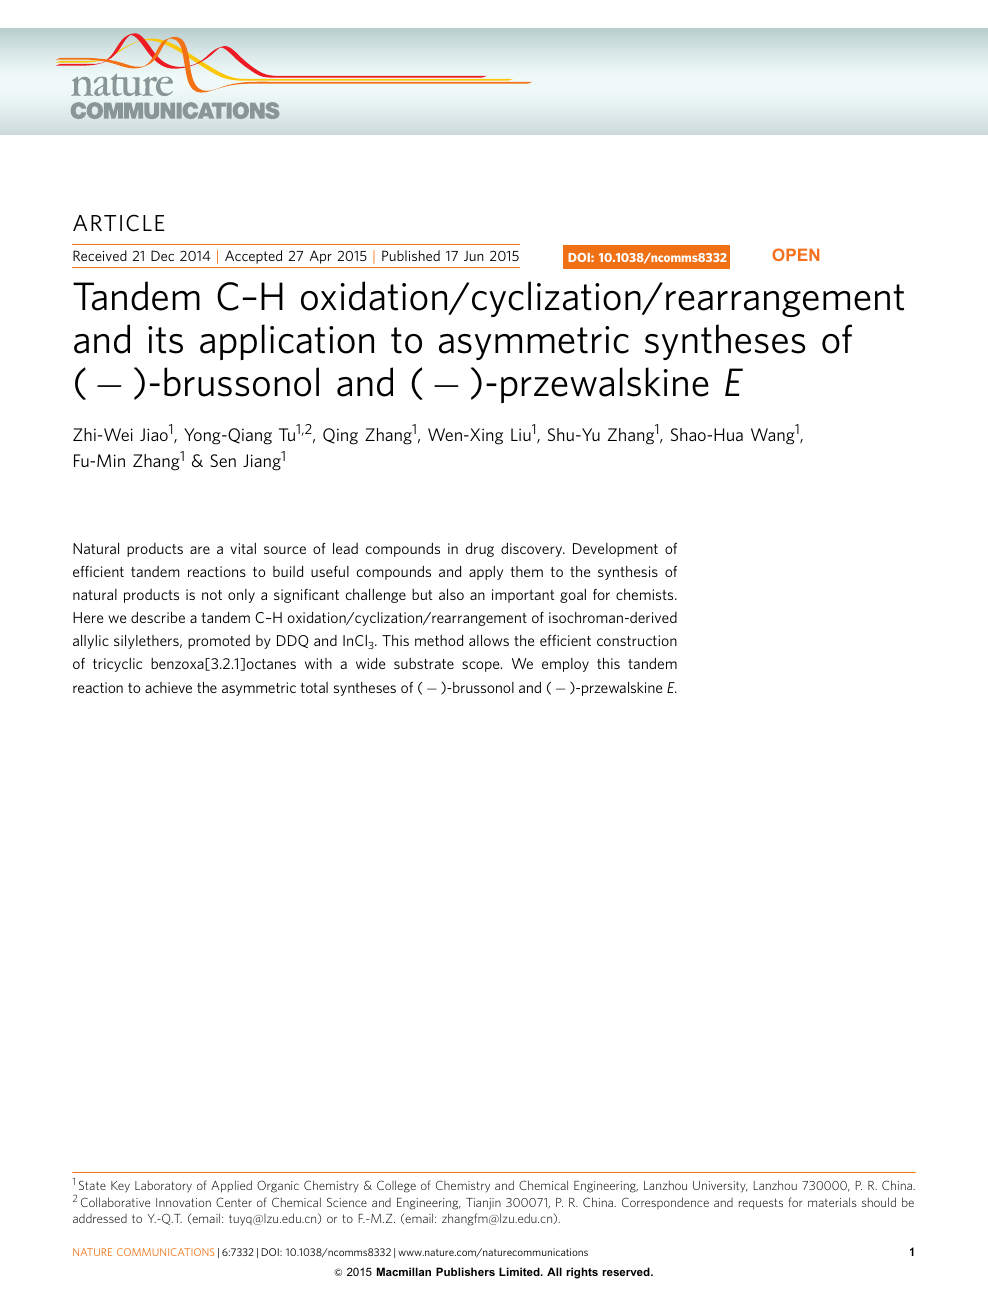 Tandem C H Oxidation Cyclization Rearrangement And Its Application To Asymmetric Syntheses Of Brussonol And Przewalskine E Topic Of Research Paper In Chemical Sciences Download Scholarly Article Pdf And Read For Free On Cyberleninka